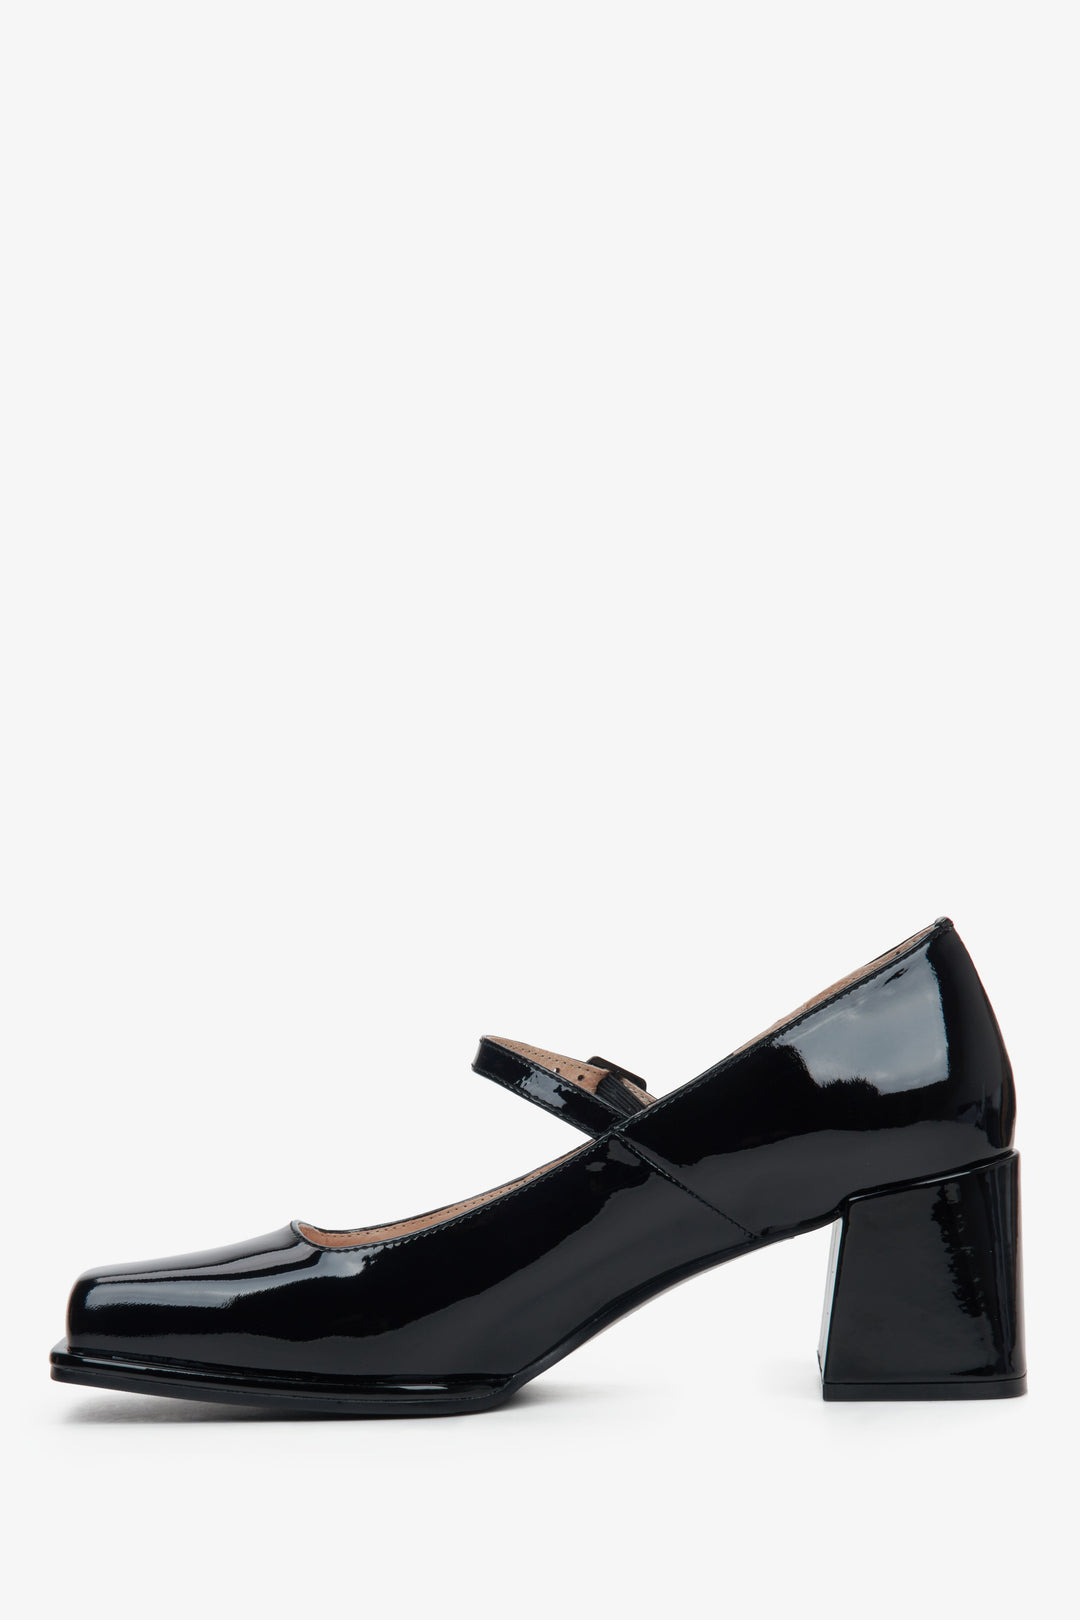 Women's black pumps made of patent genuine leather.